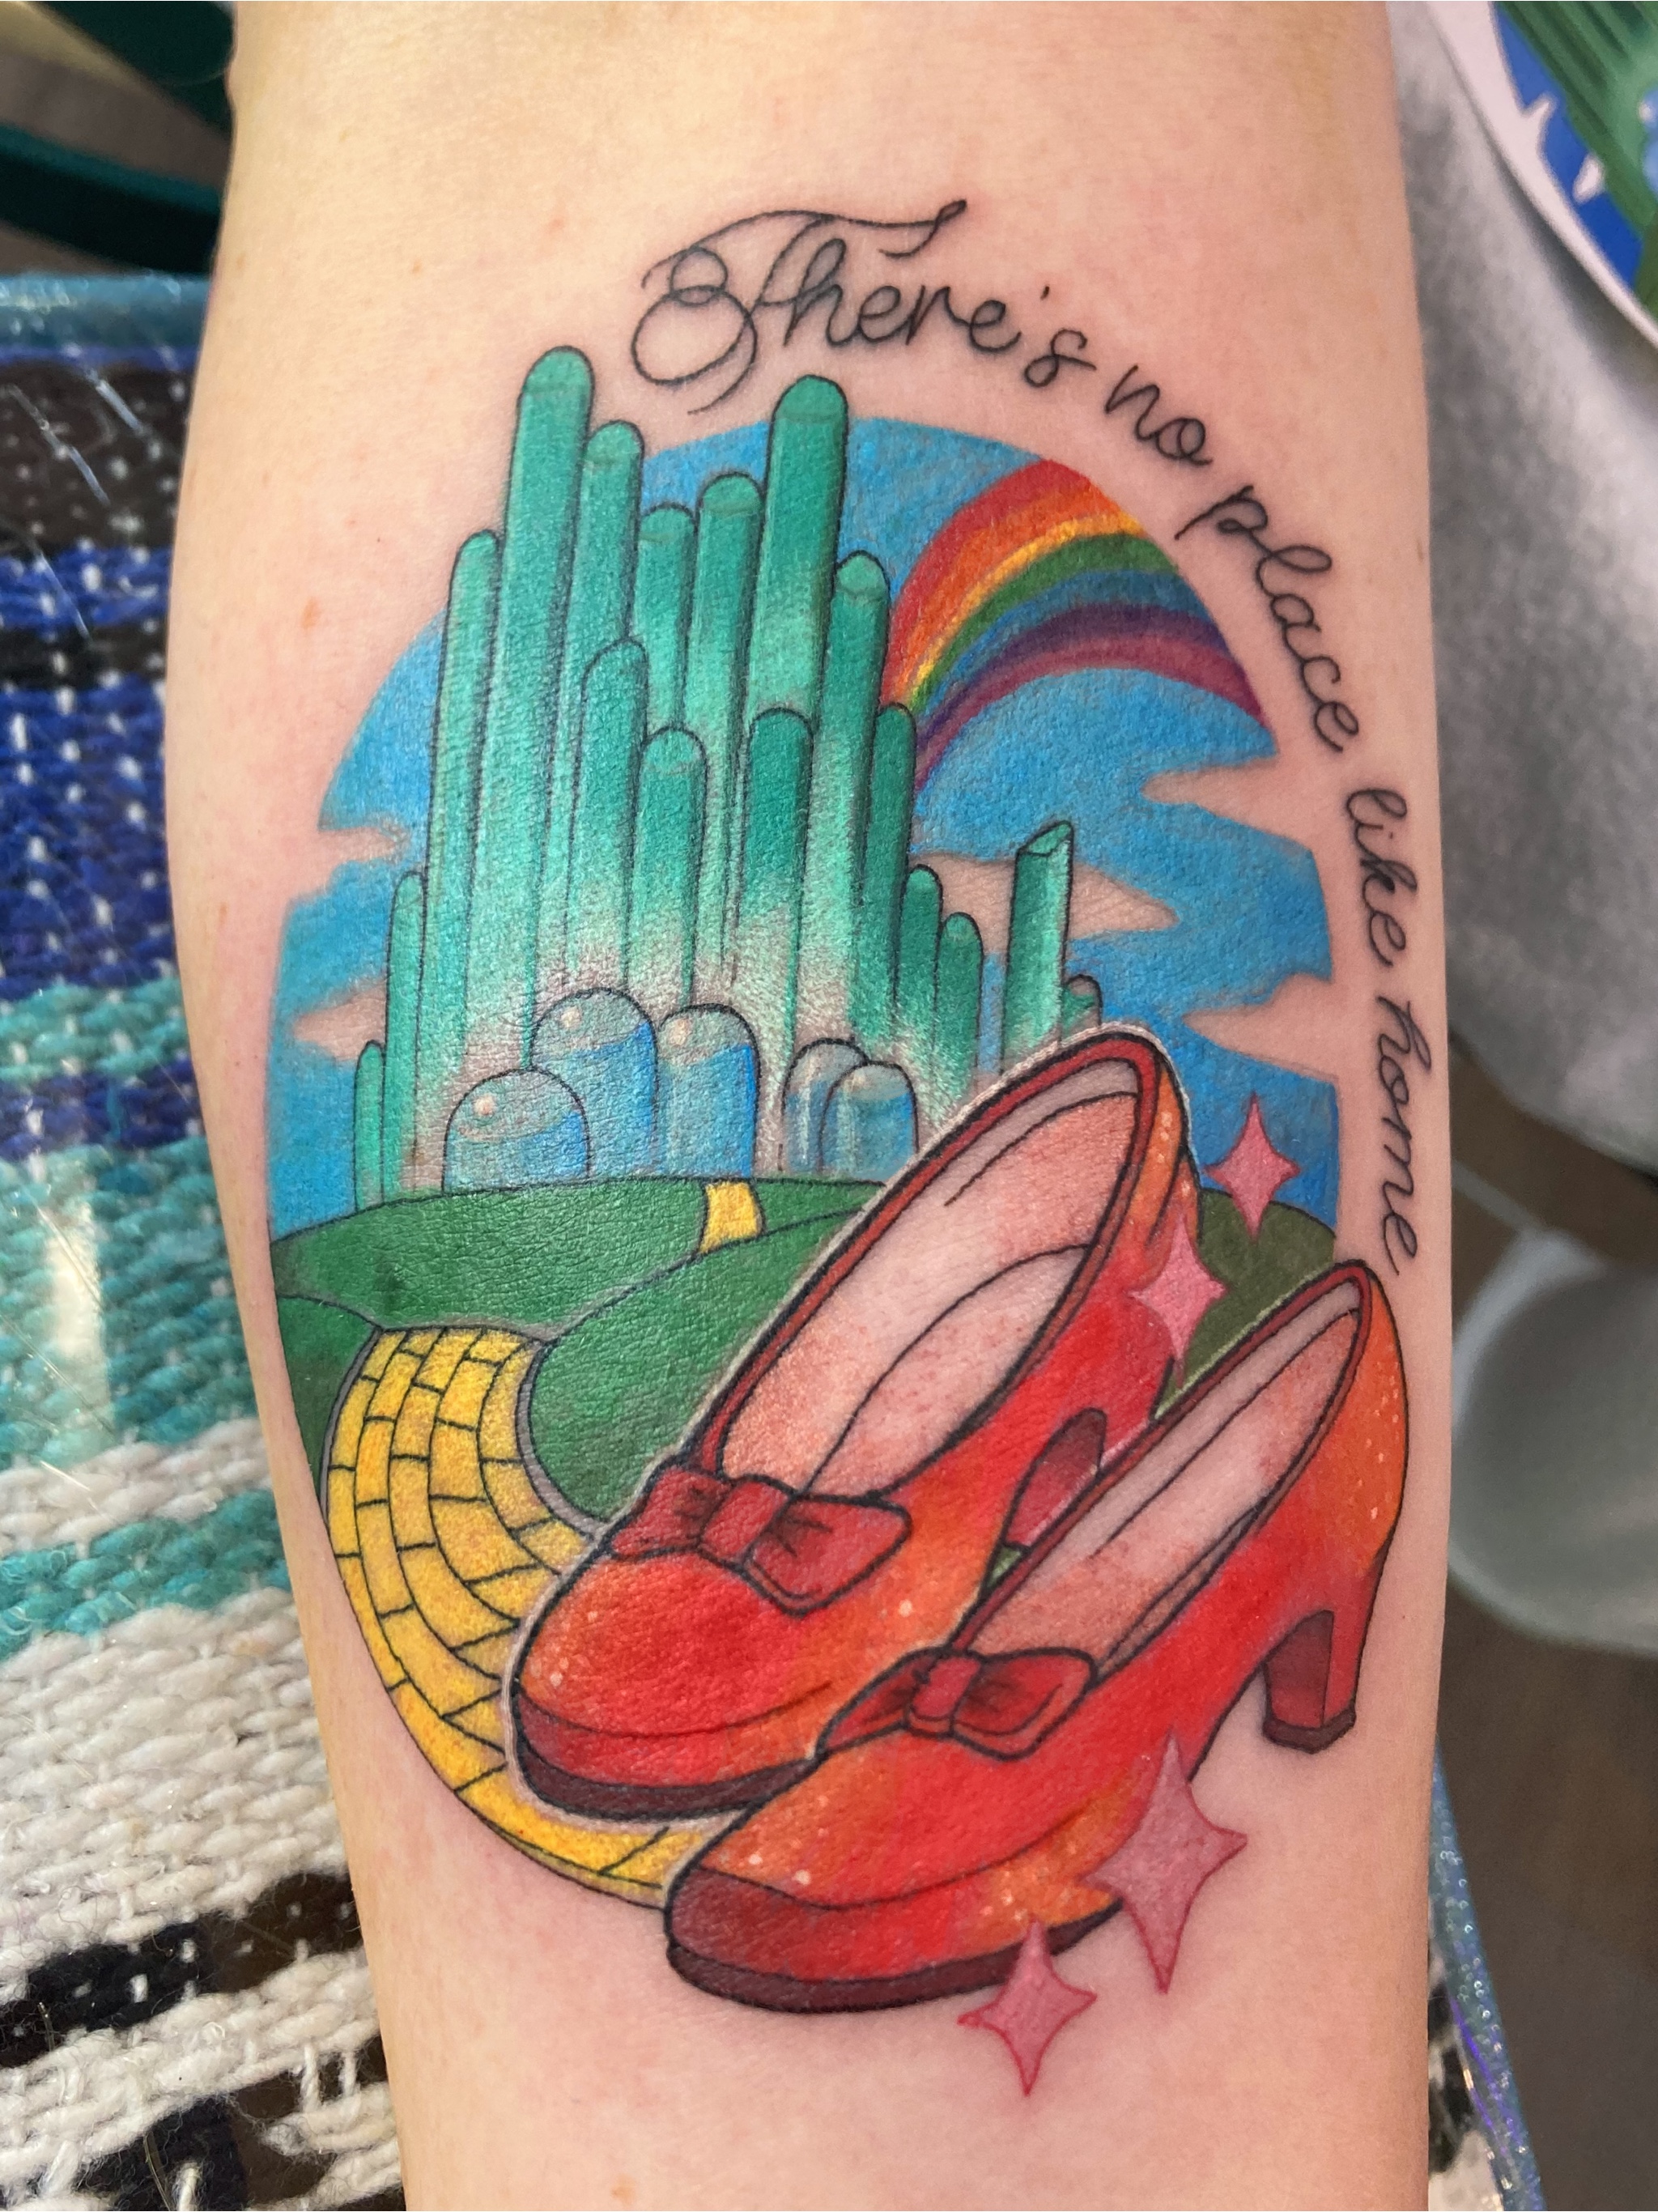 Red ruby slippers for my grandma Ruby and a yellow peony for the bright  optimism she brings to my life Done by Jessica Meltvedt at Black Dahlia  Tattoo Gallery in Willoughby Ohio 